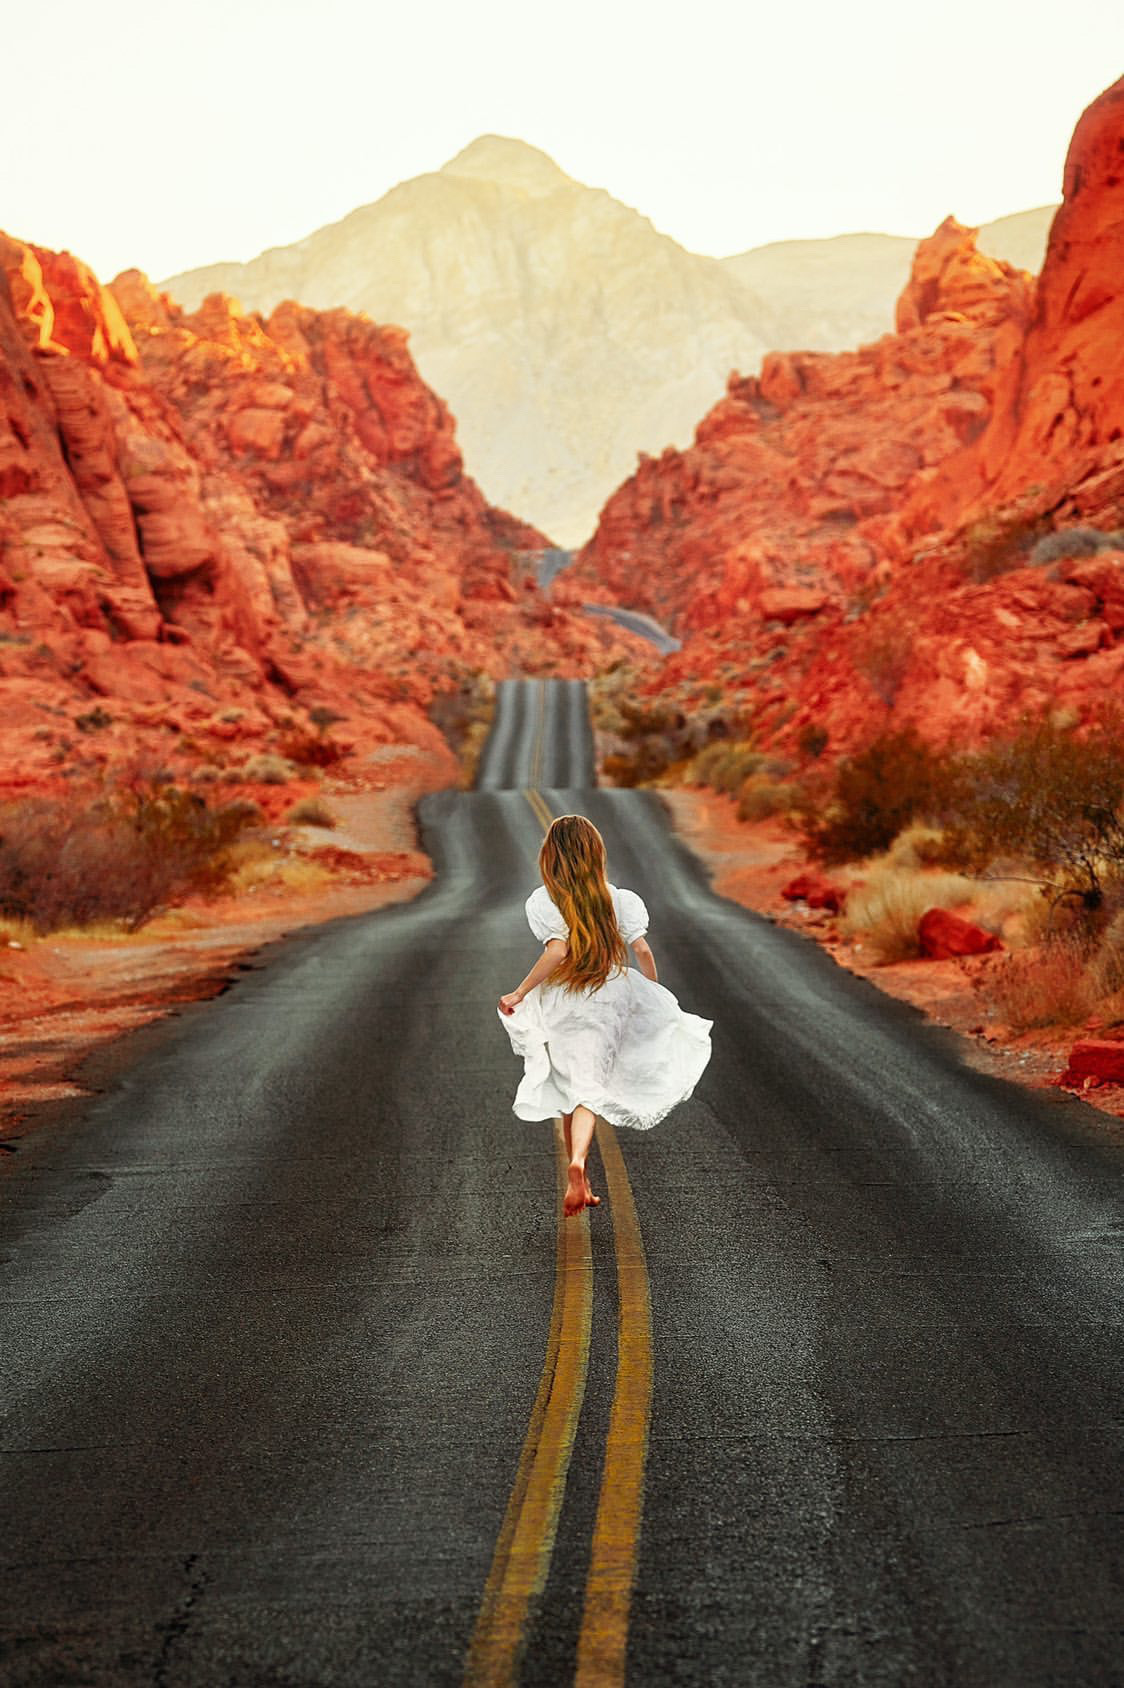 A woman in a white dress running down a desolate road in the middle of the Valley of Fire State Park